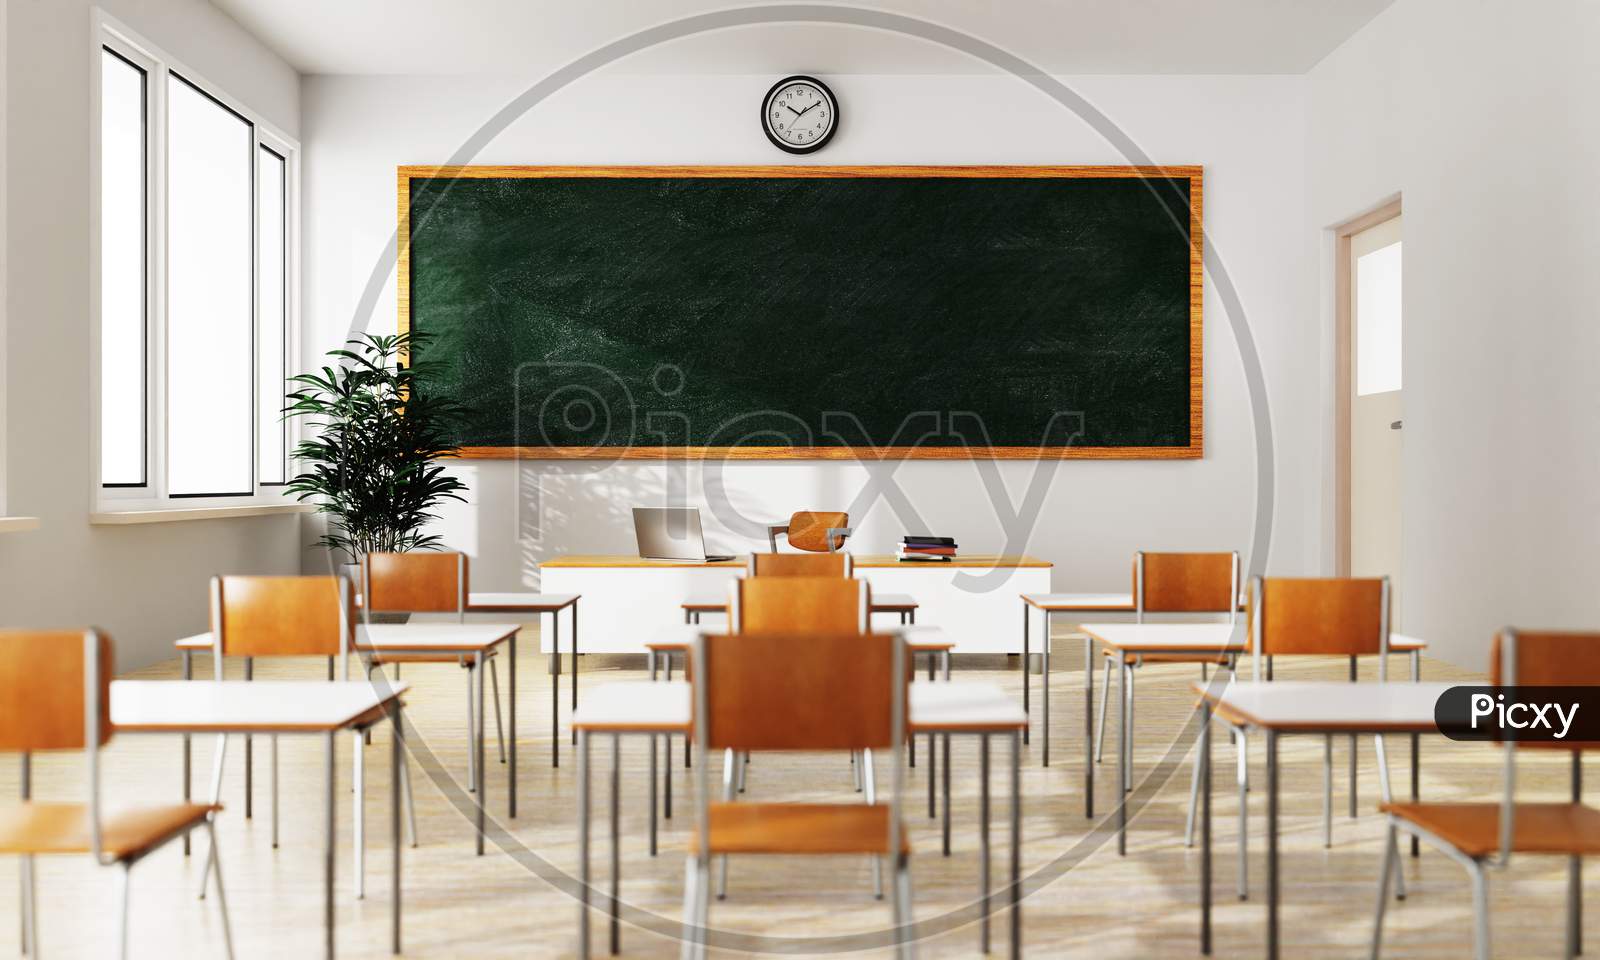 Empty White Classroom Background With Green Chalkboard Table And Seat On Wooden Floor. Education And Back To School Concept. Architecture Interior. Social Distancing Theme. 3D Illustration Rendering